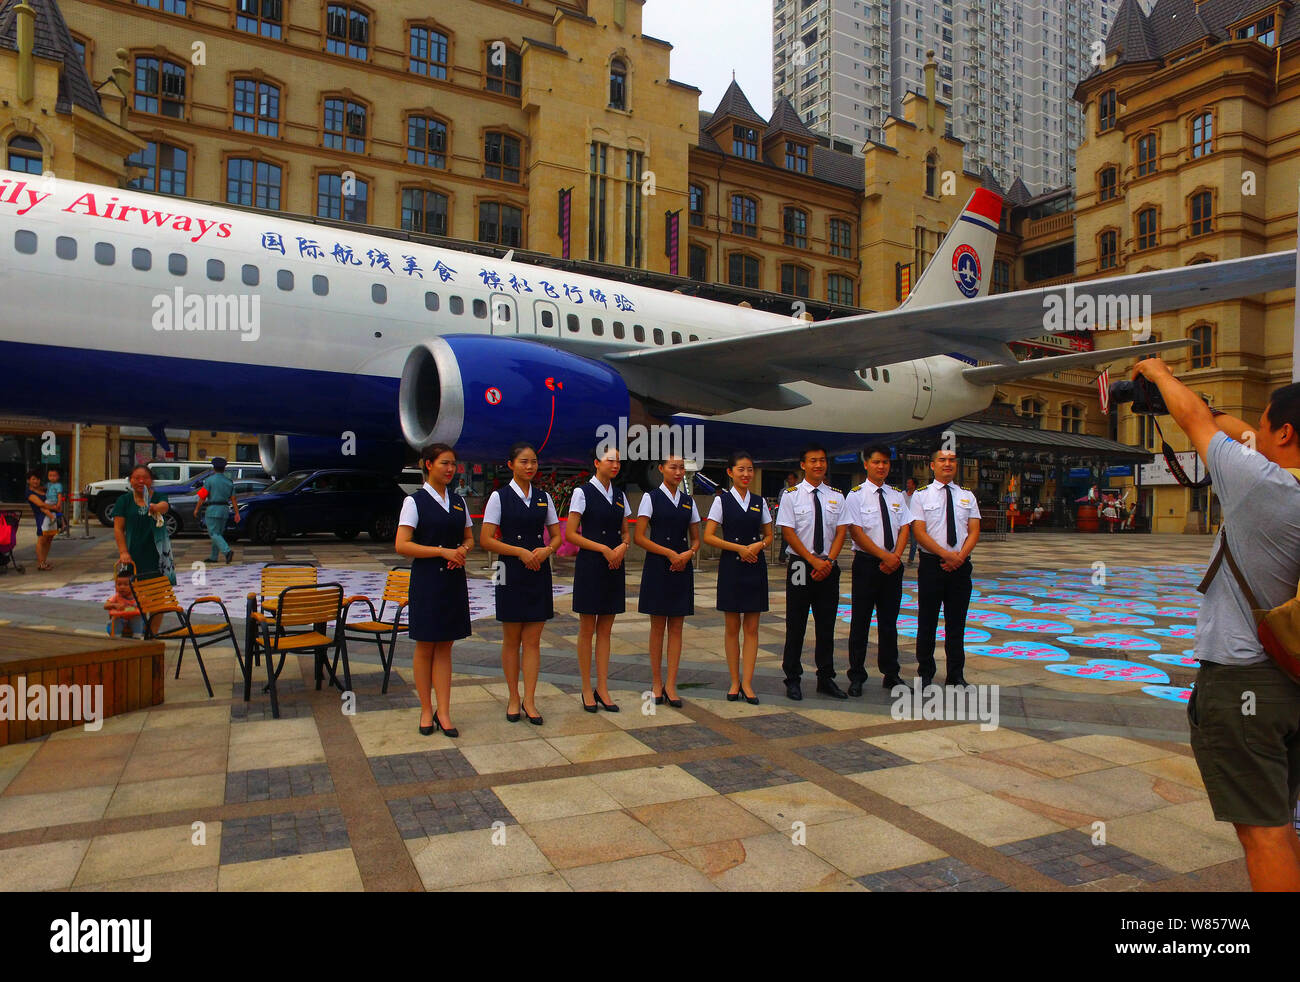 Chinese waitresses and waiters dressed in uniforms of air hostess and pilot pose in front of the Boeing 737-400 airplane restaurant 'Lily Airways' on Stock Photo